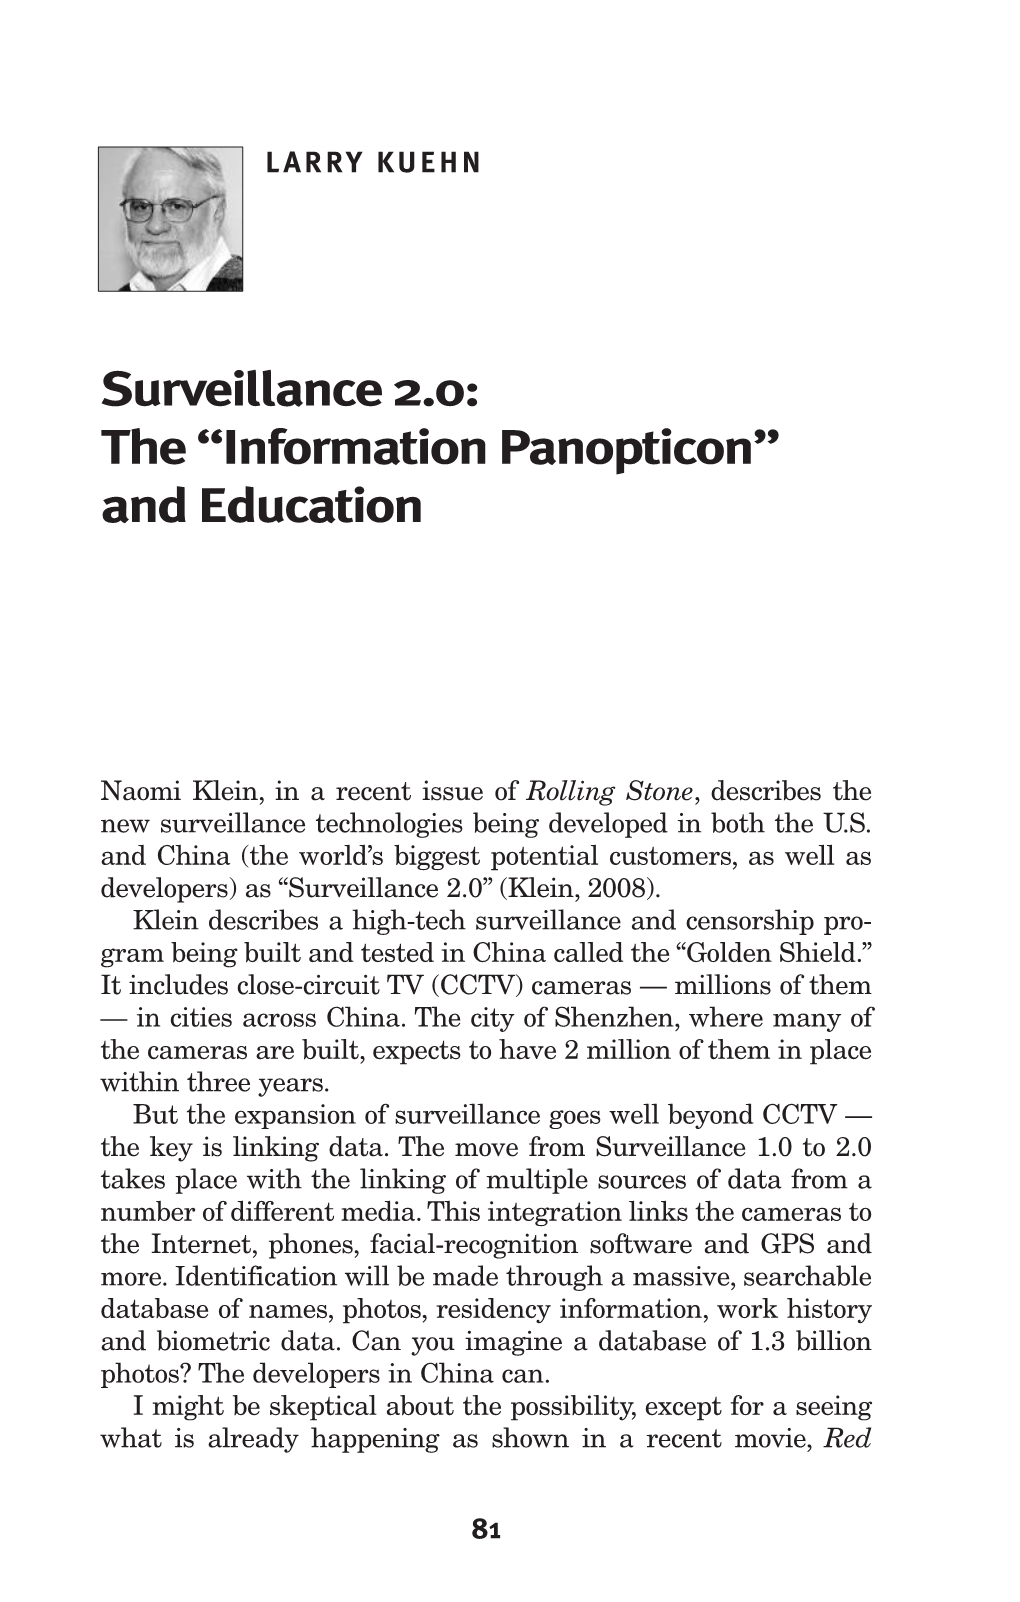 Surveillance 2.0: the “Information Panopticon” and Education